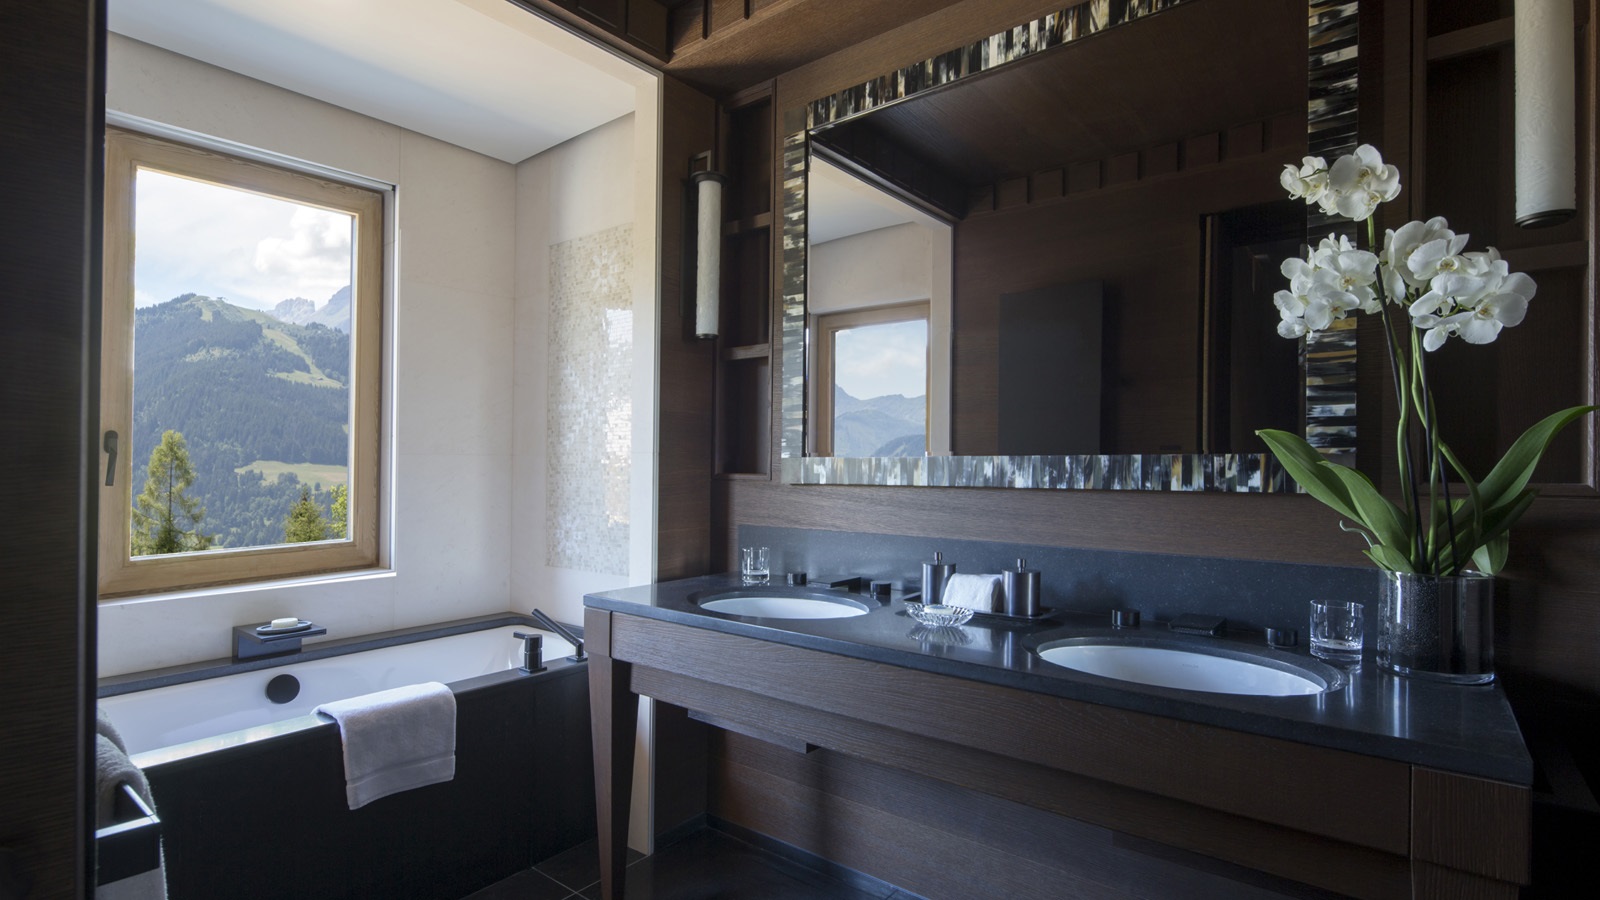 Luxury bathroom with a stunning view at Four Seasons Hotel Megève in the French Alps